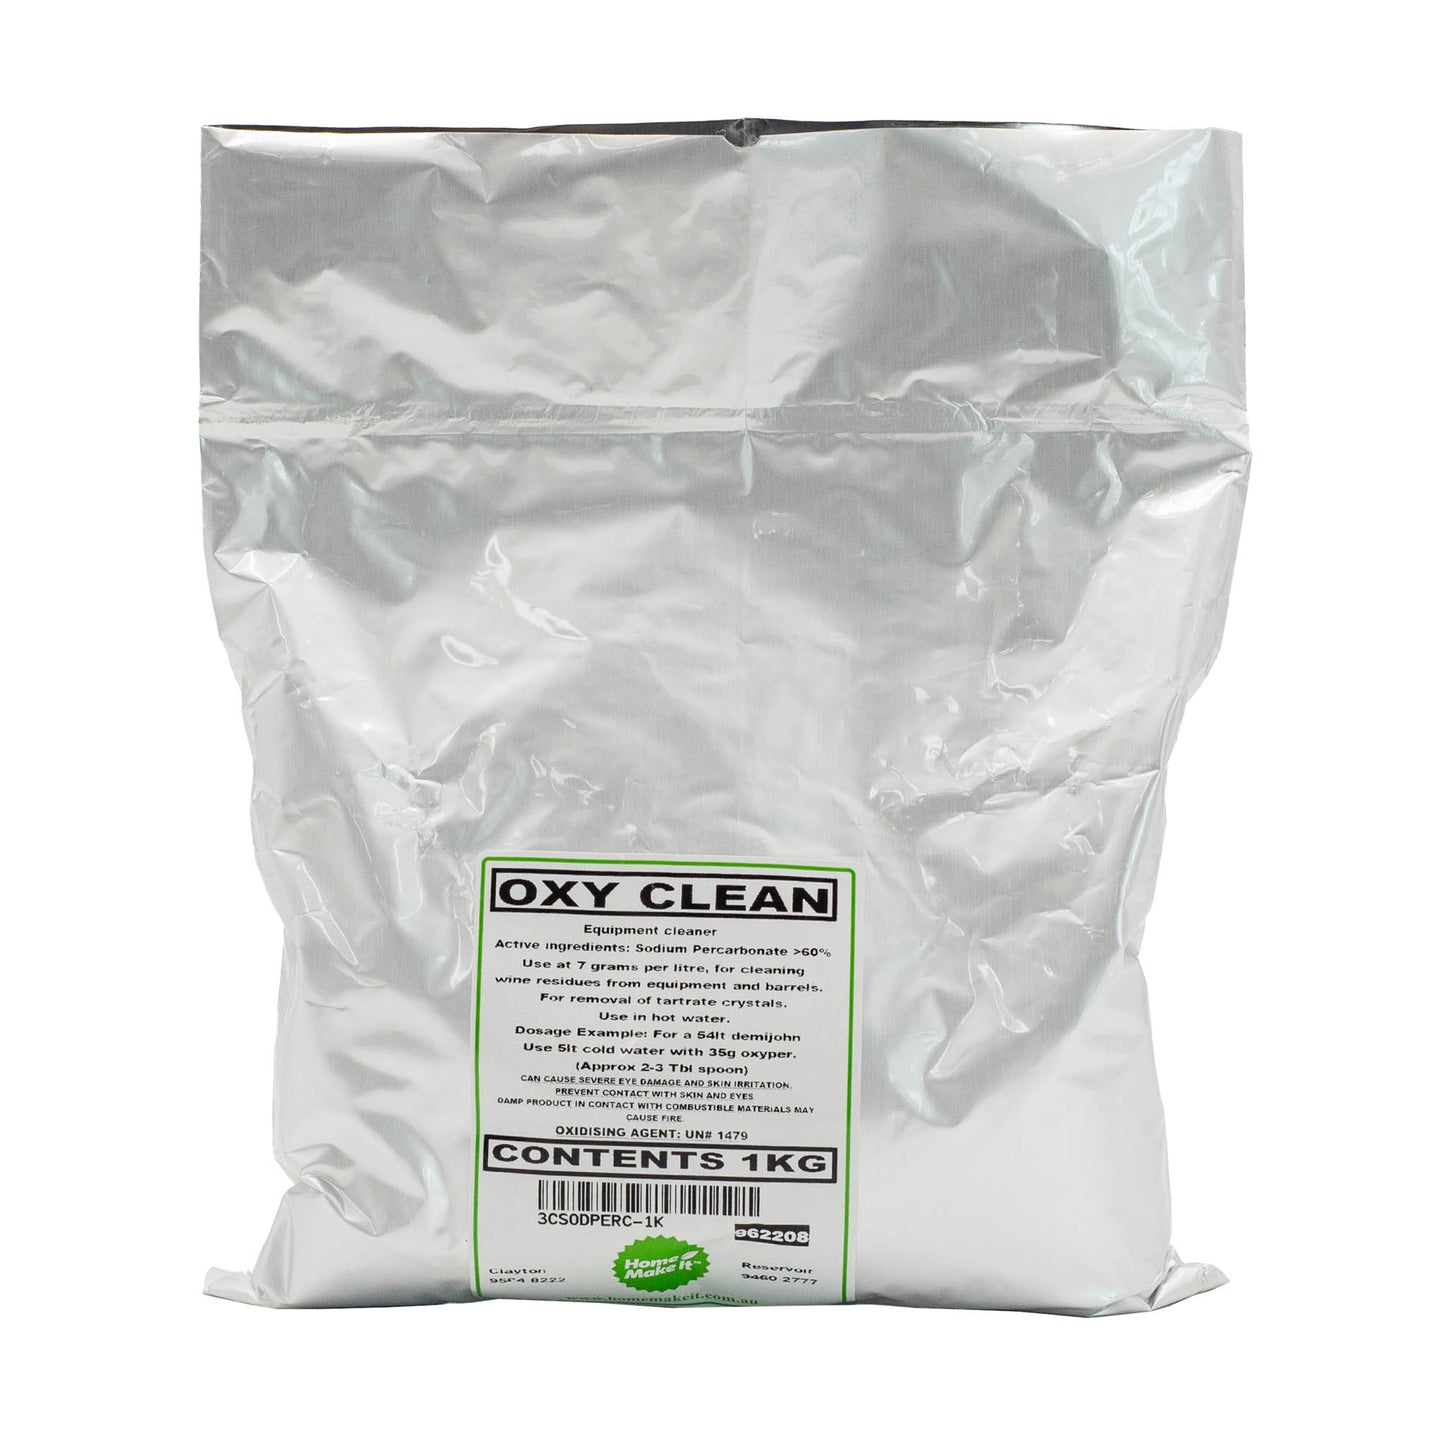 1kg bag of sodium percarbonate or oxy clean is an alkaline chemical found in cleaning products